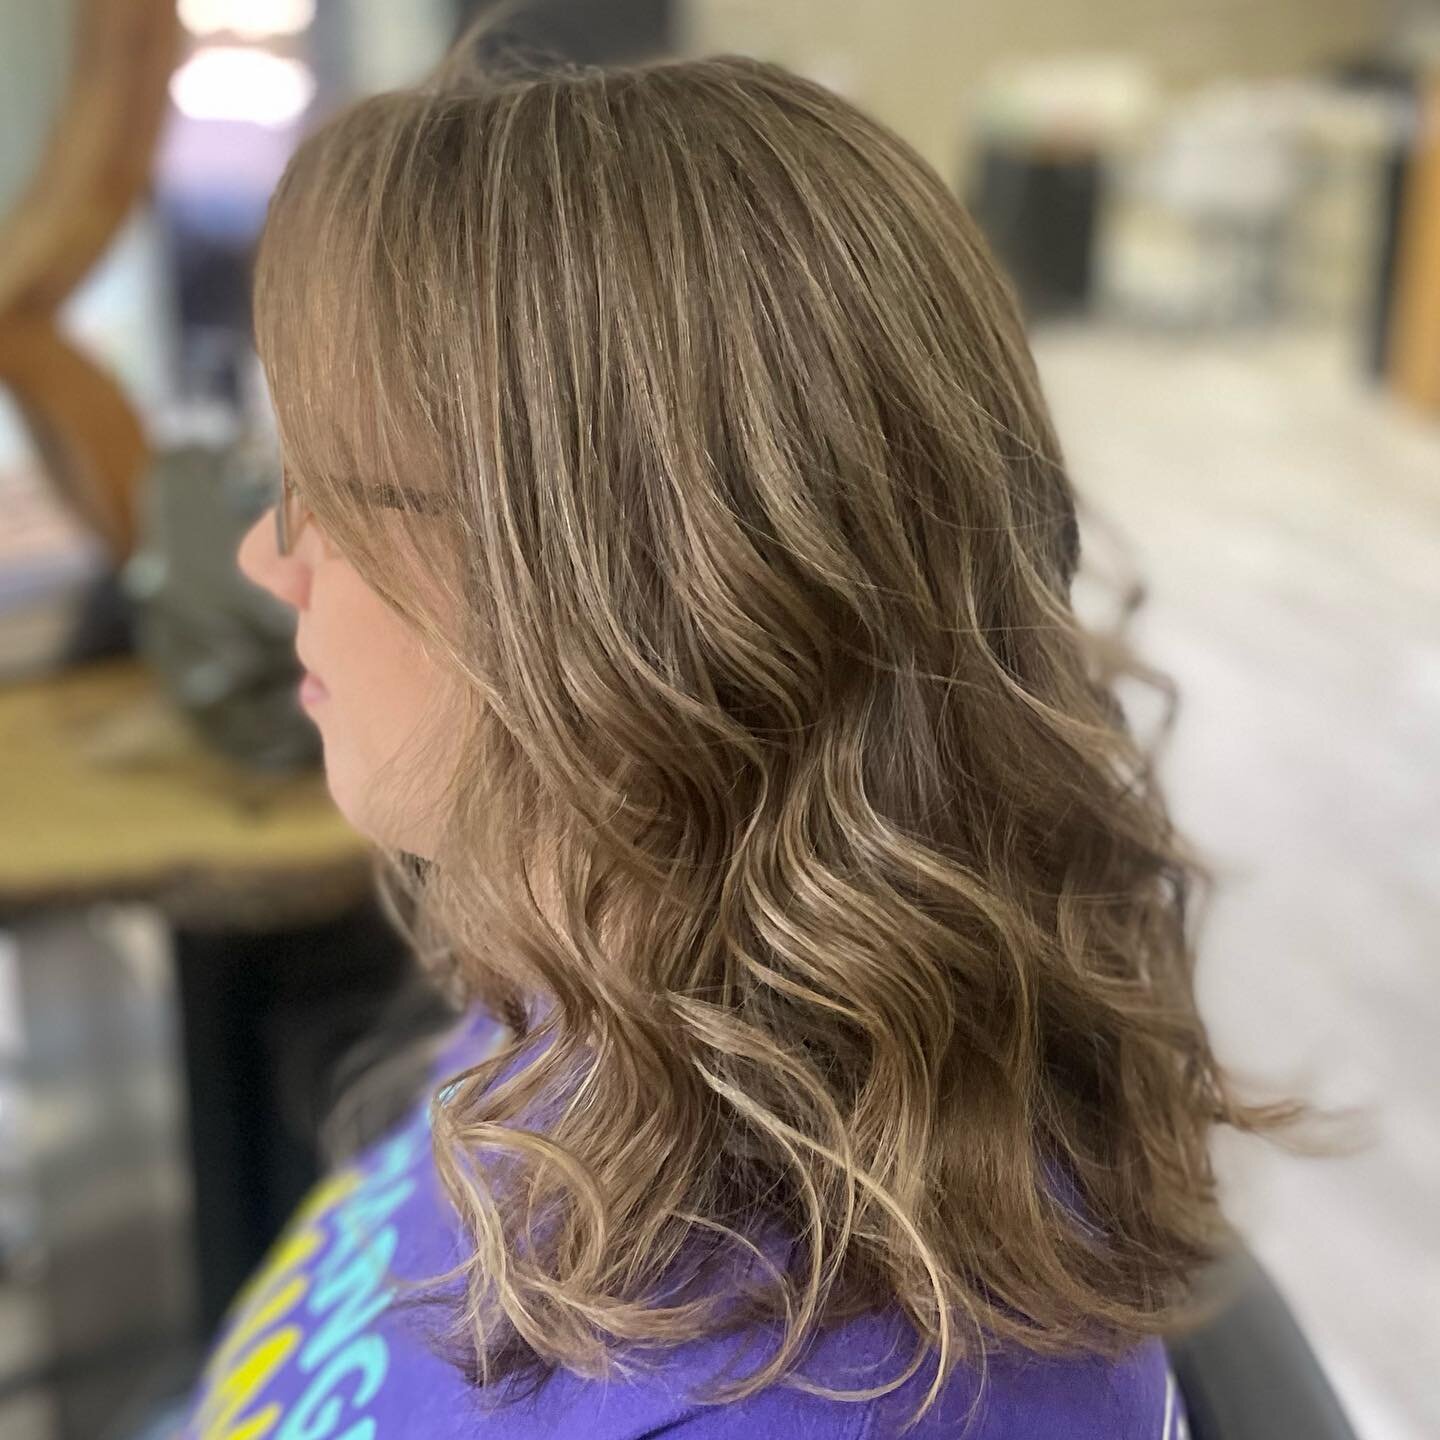 From spring to summer. Lightning her hair with baby lights to give her a natural looking color while being low maintenance .
&bull;
&bull;
&bull;
 #shearroots #balayagespecialist #balayage #babylights #scottsdalehairstylist #chandlerhairstylist #gilb